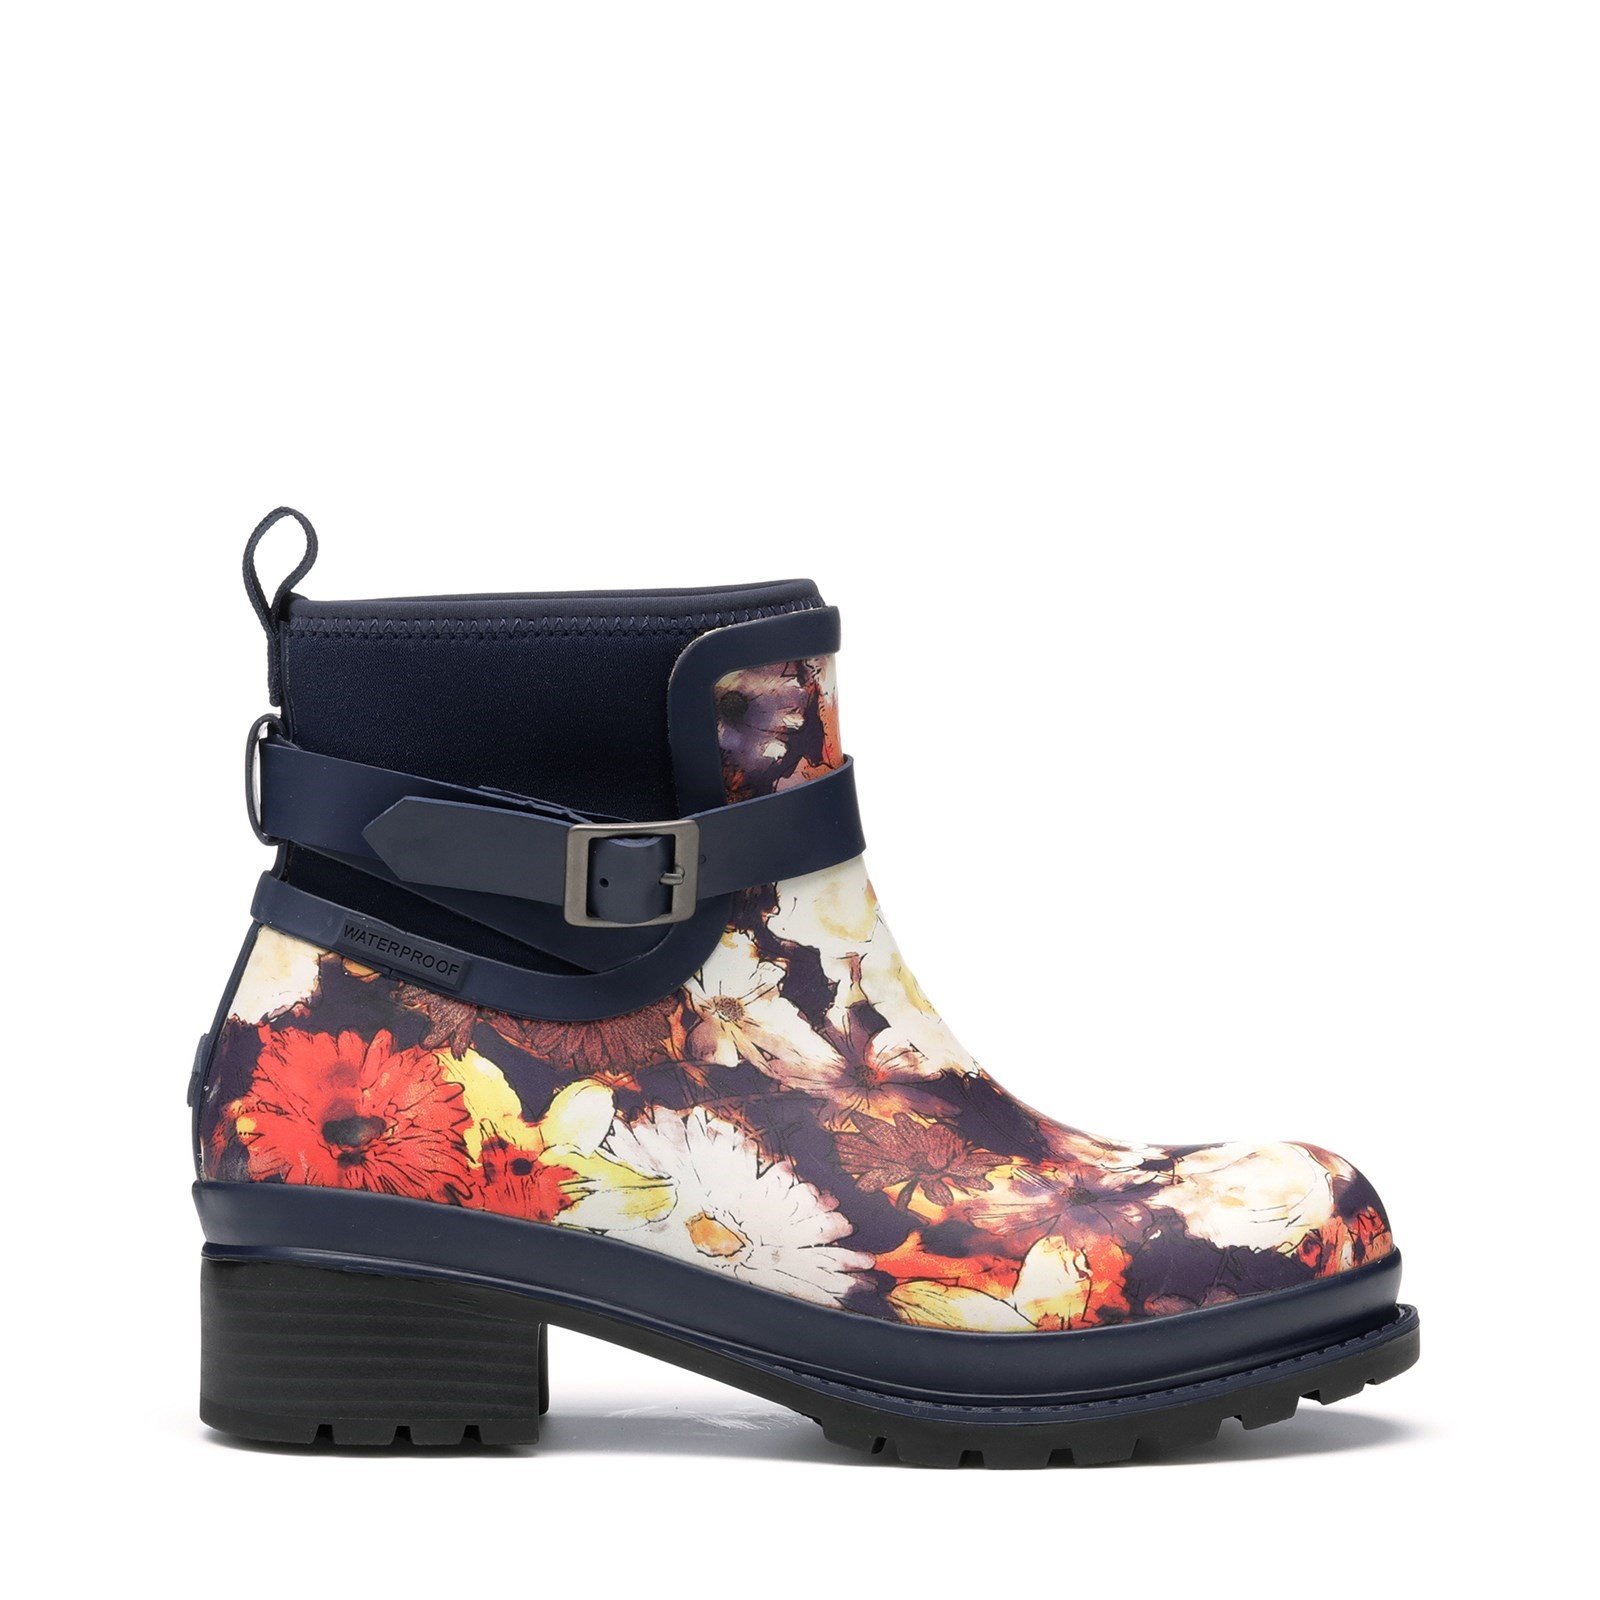 Muck Boots Women's Liberty Rubber Ankle Boots Various Colours 31816 - Navy Floral Print 4